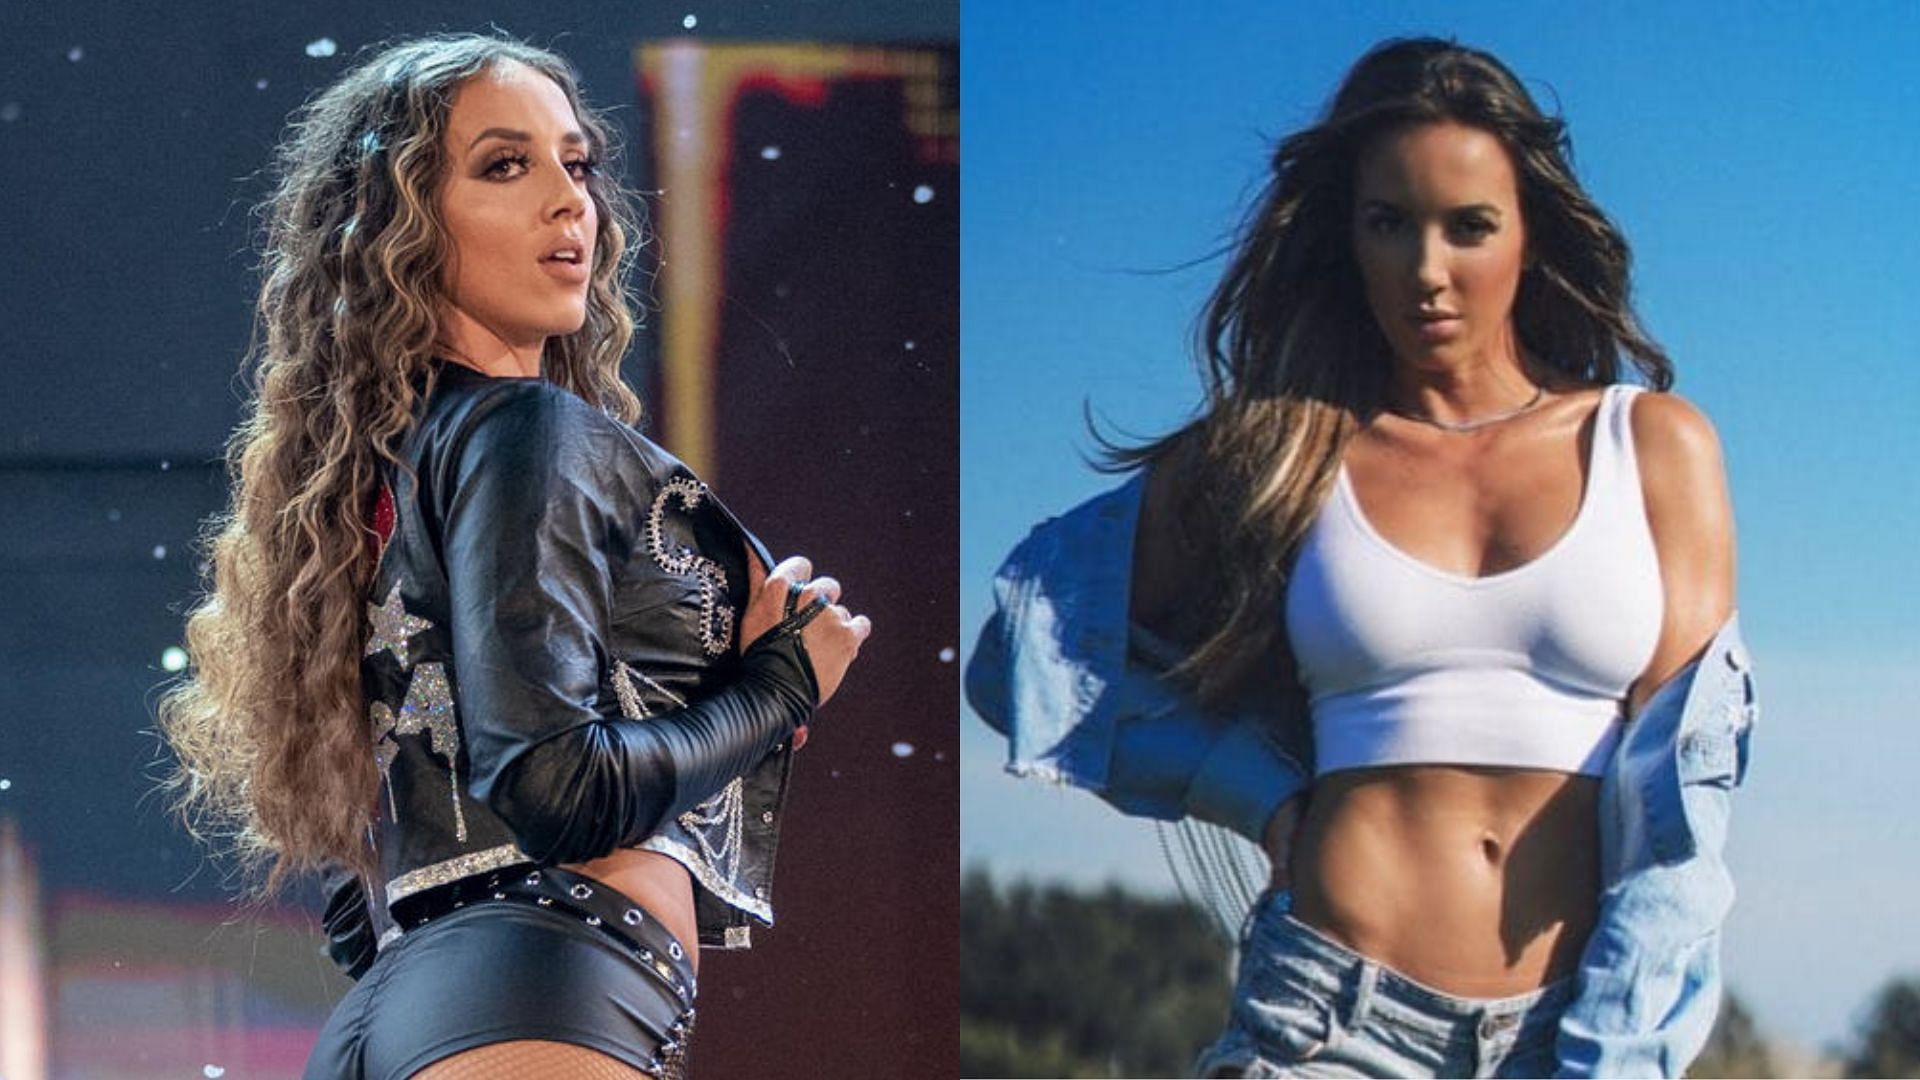 Chelsea Green recently made her WWE return at the Royal Rumble